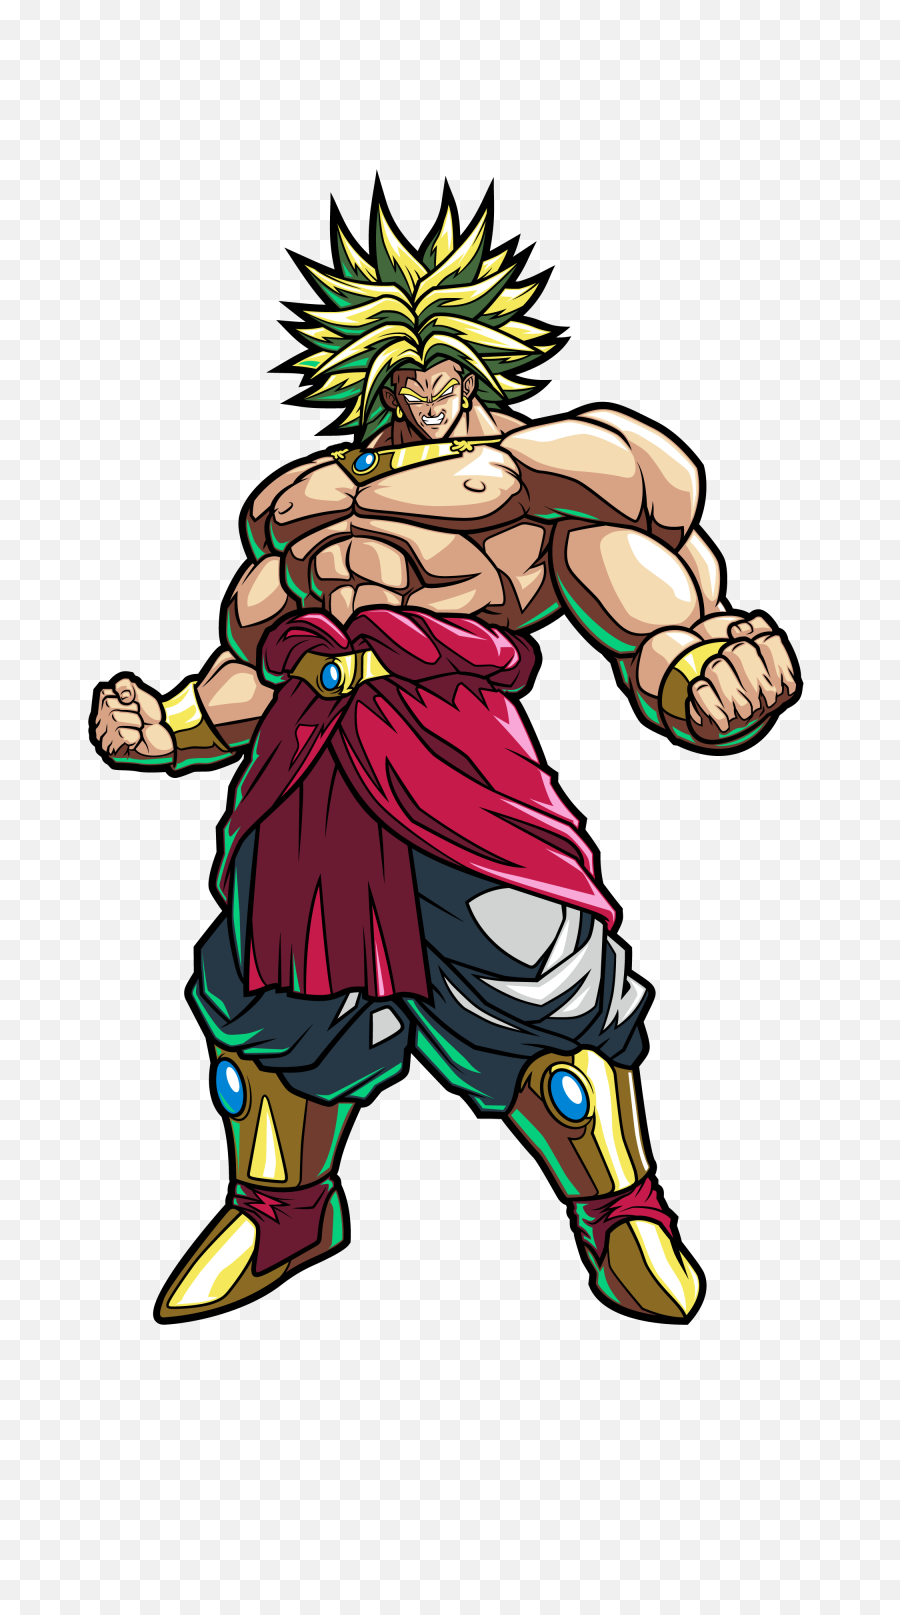 Dragonball Fighter Z - Broly 3 Standard Figpin 174 Dragon Ball Fighters Broly Png,Dragon Ball Super Broly Png